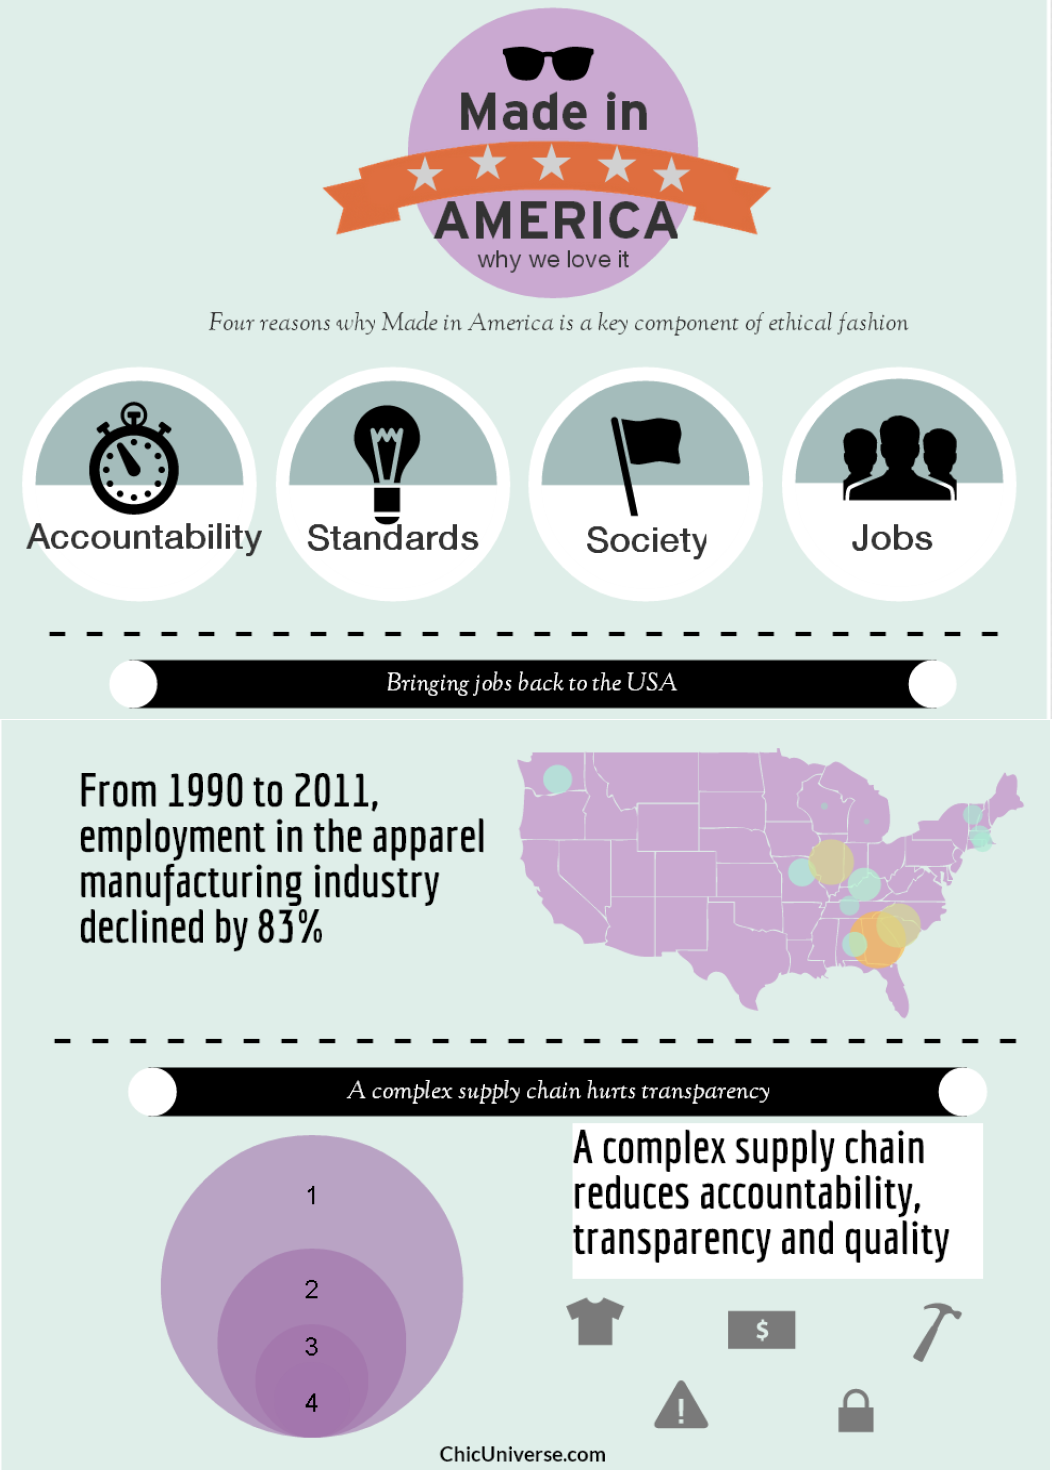 Made in America infographic